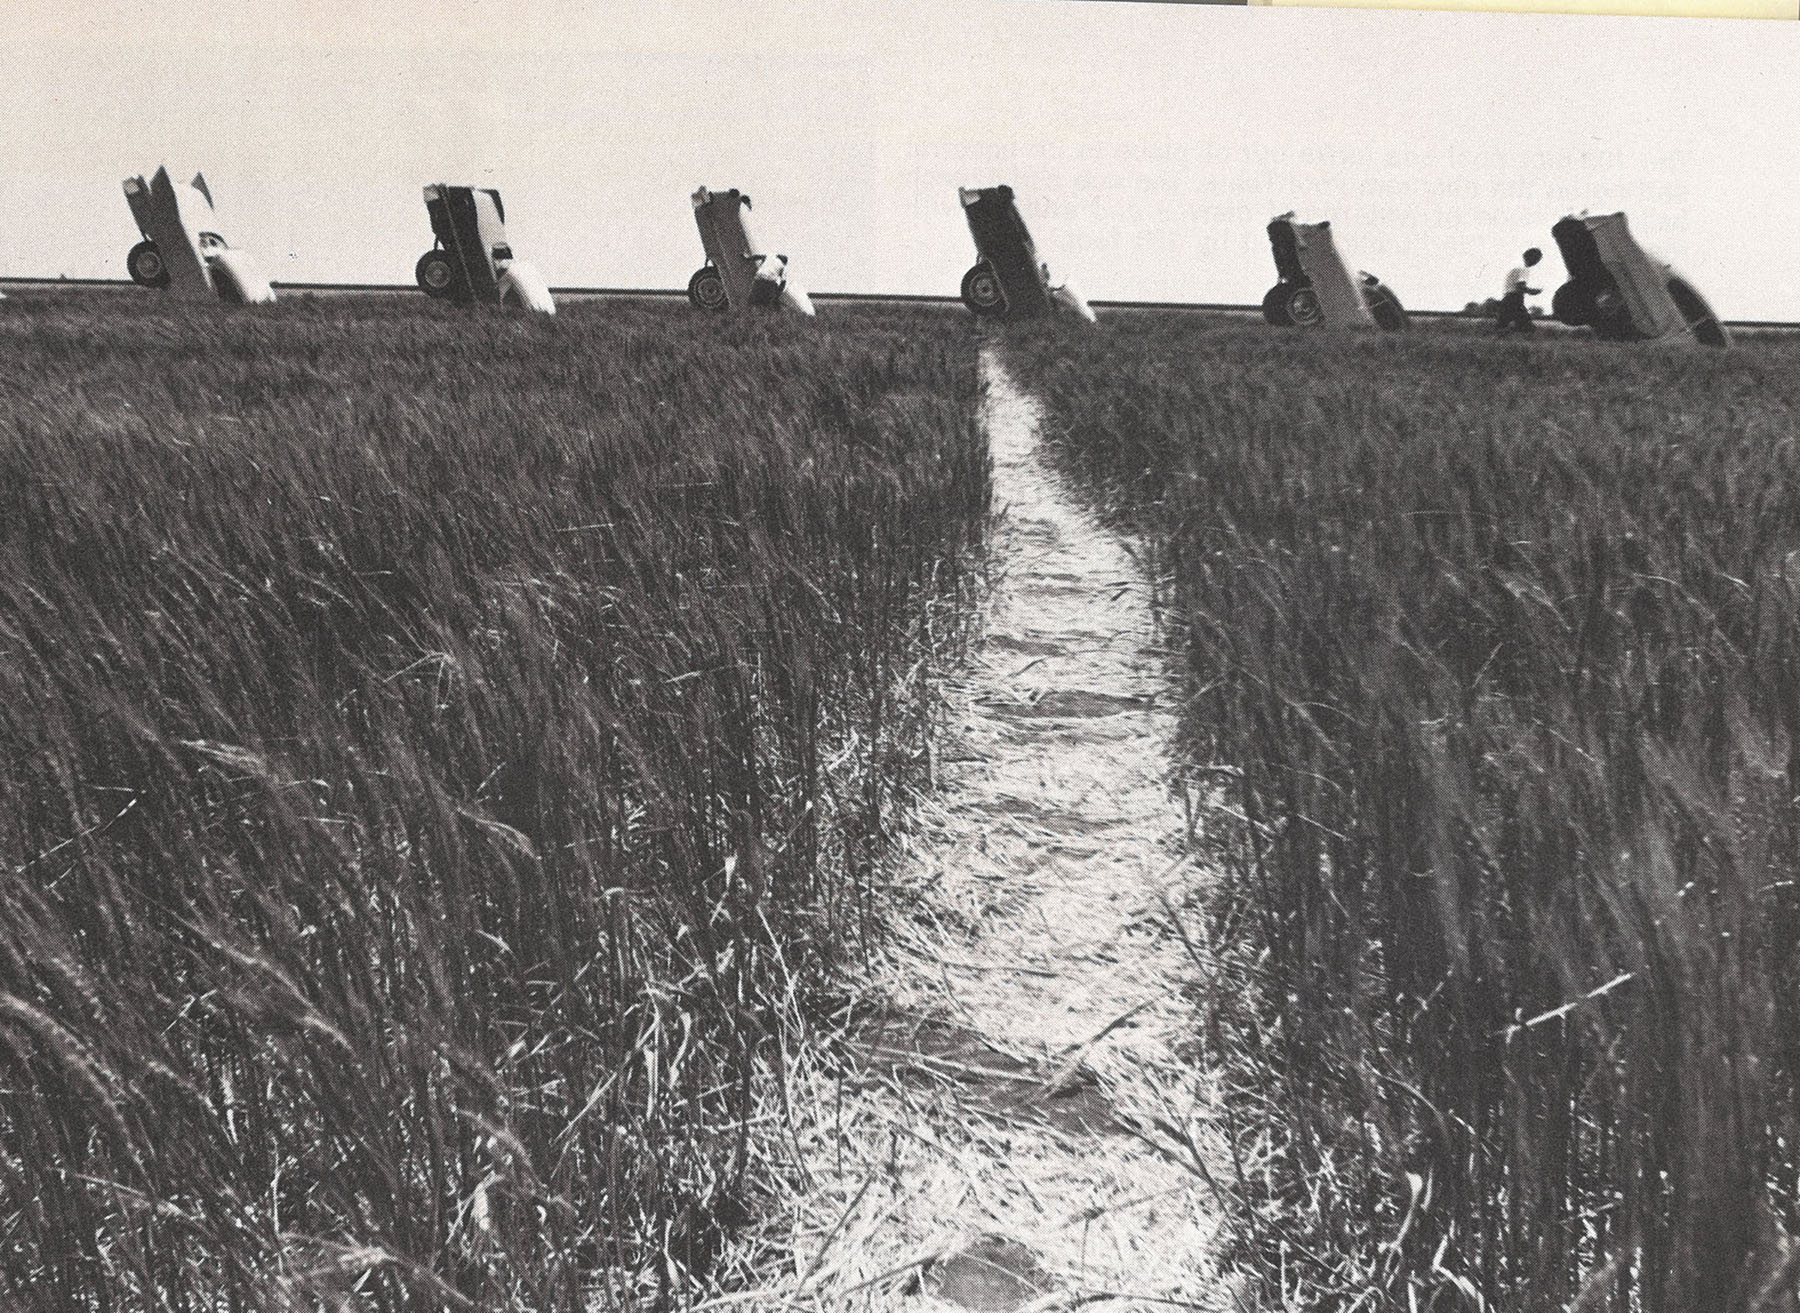 A black and white photograph of Cadillac ranch in a grassland